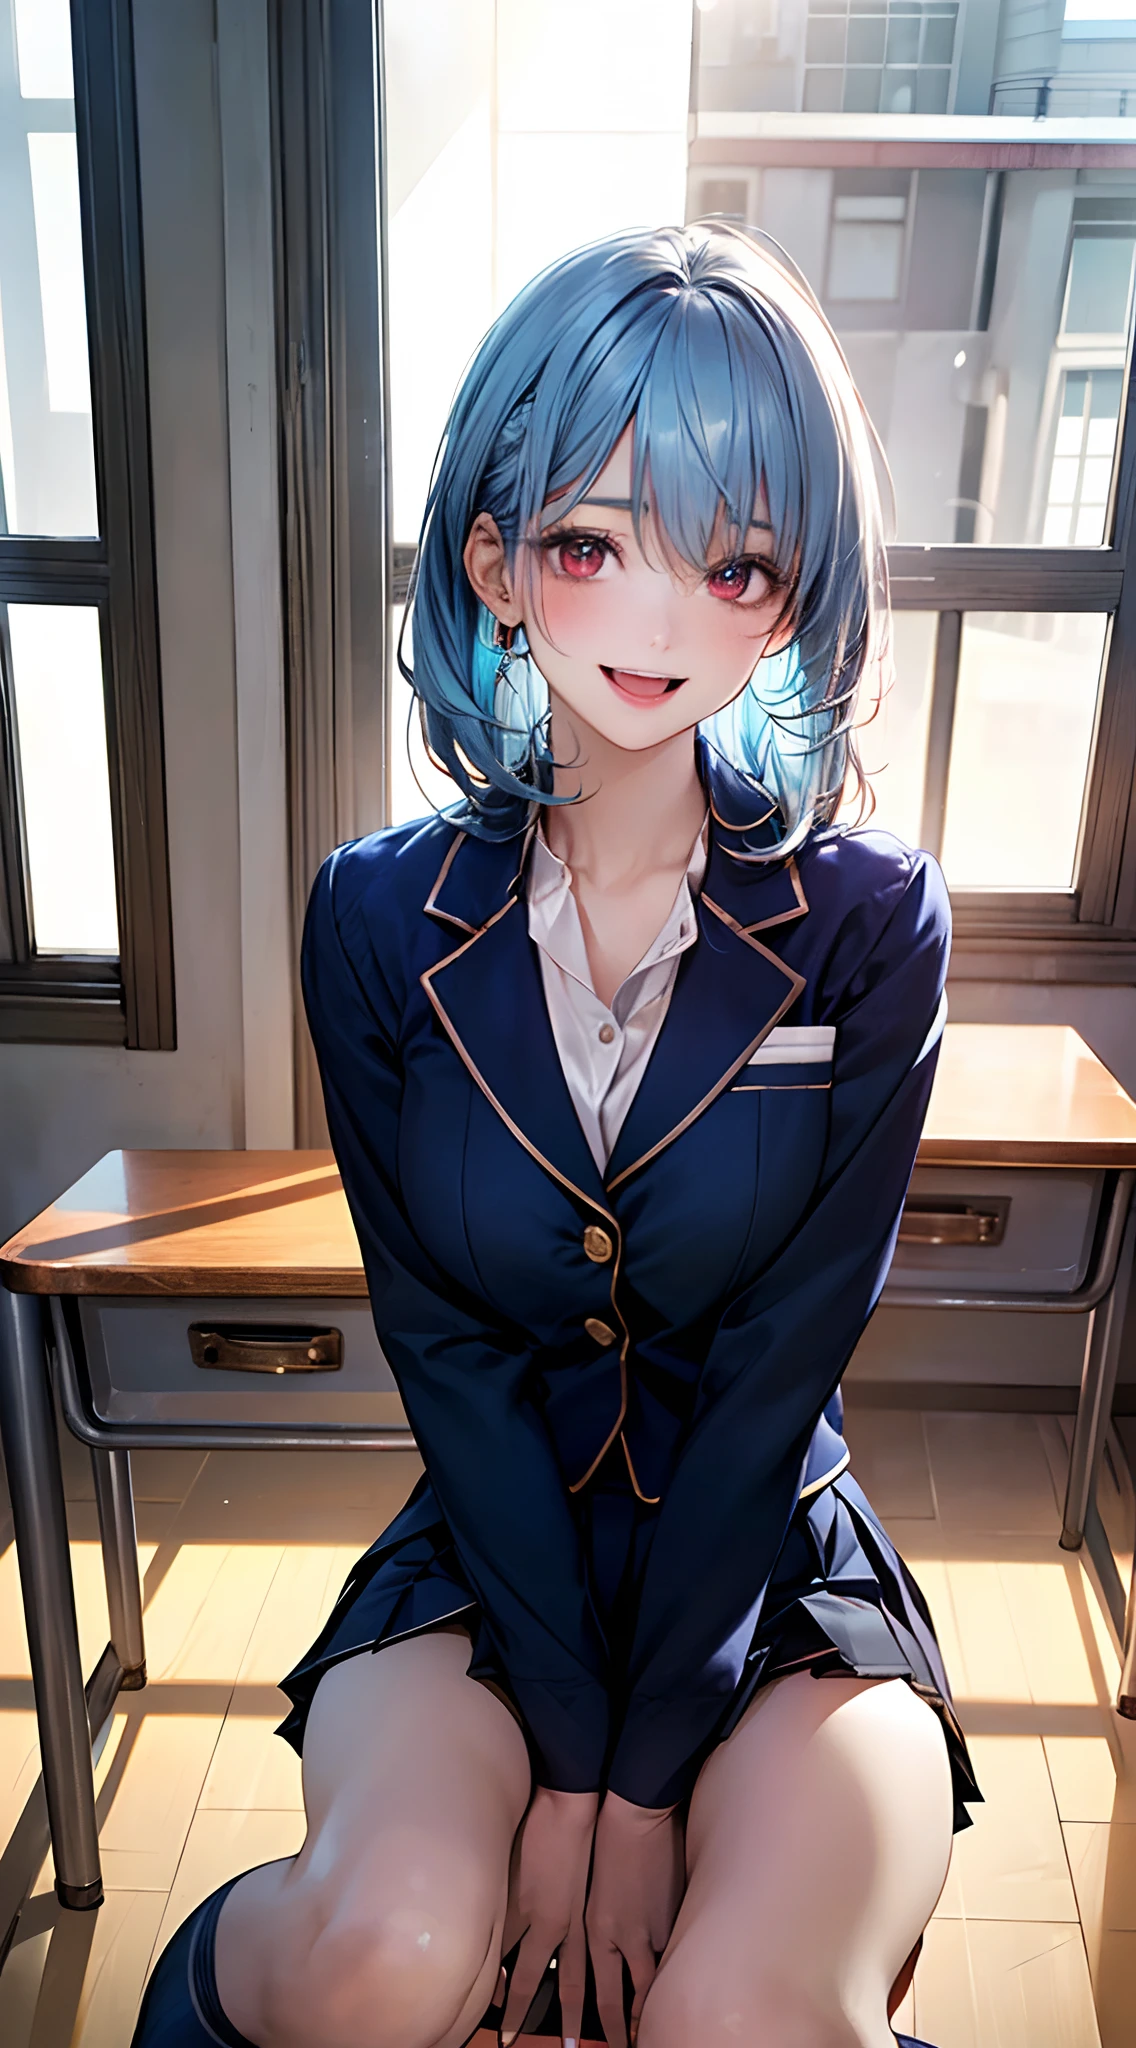 (masterpiece:1.2, top-quality), (realistic, photorealistic:1.4), beautiful illustration, NSFW, 
looking at viewer, cowboy shot, front view:0.8, 
1 girl, japanese, high school girl, light blue hair, (middle hair:1.6), bangs, hair between eye, red eyes, large breasts:0.8, (thick thighs), 
beautiful hair, beautiful face, beautiful detailed eyes, beautiful clavicle, beautiful body, beautiful chest, beautiful thigh, beautiful legs, beautiful fingers, 
(beautiful scenery), dawn, bright and refreshing classroom, desks, chairs, curtains, 
((navy blazer, pleated mini skirt, navy blue socks, private school uniform:1.2)), pink panties, 
(swollen), ((seductive posture: 1.2, attractiveness: 1.2)), (idle),
(erotic, sexy, upper eyes, smiling smile: 1.2), shiny skin, open mouth, 
perfect face, cute and symmetrical face, natural side lighting, movie lighting), 
sitting chair, (hands between legs),